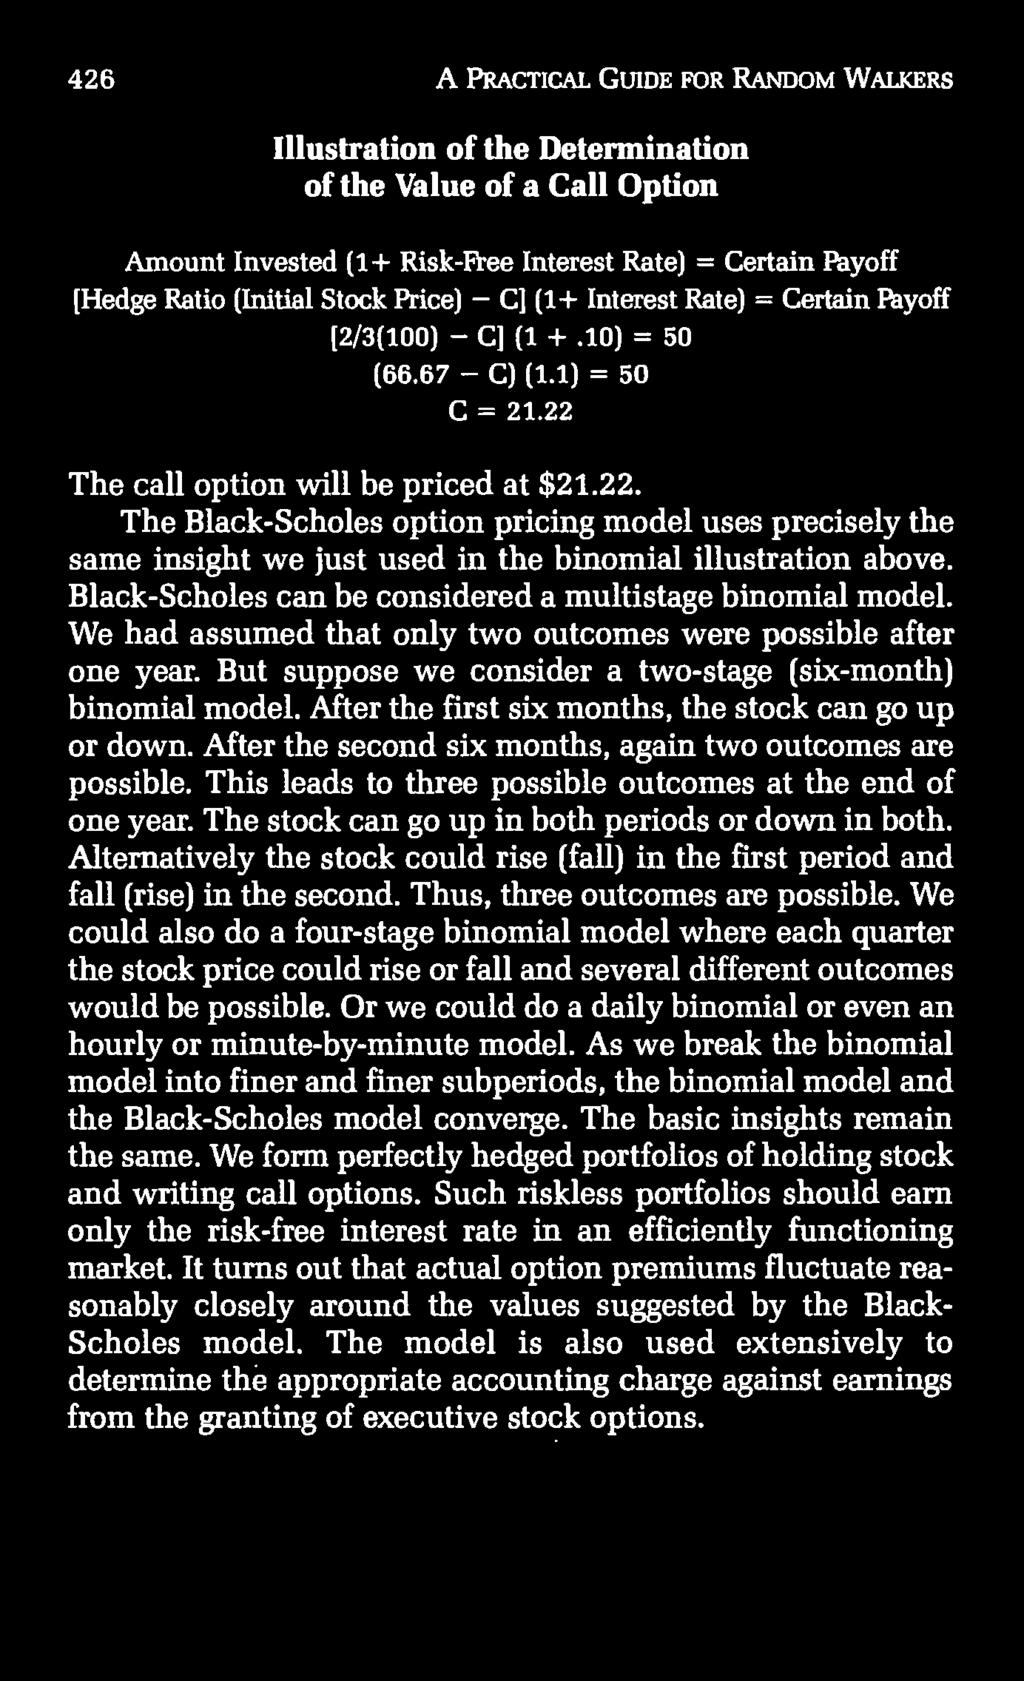 The call option will be priced at $21.22. The Black-Scholes option pricing model uses precisely the same insight we just used in the binomial illustration above.